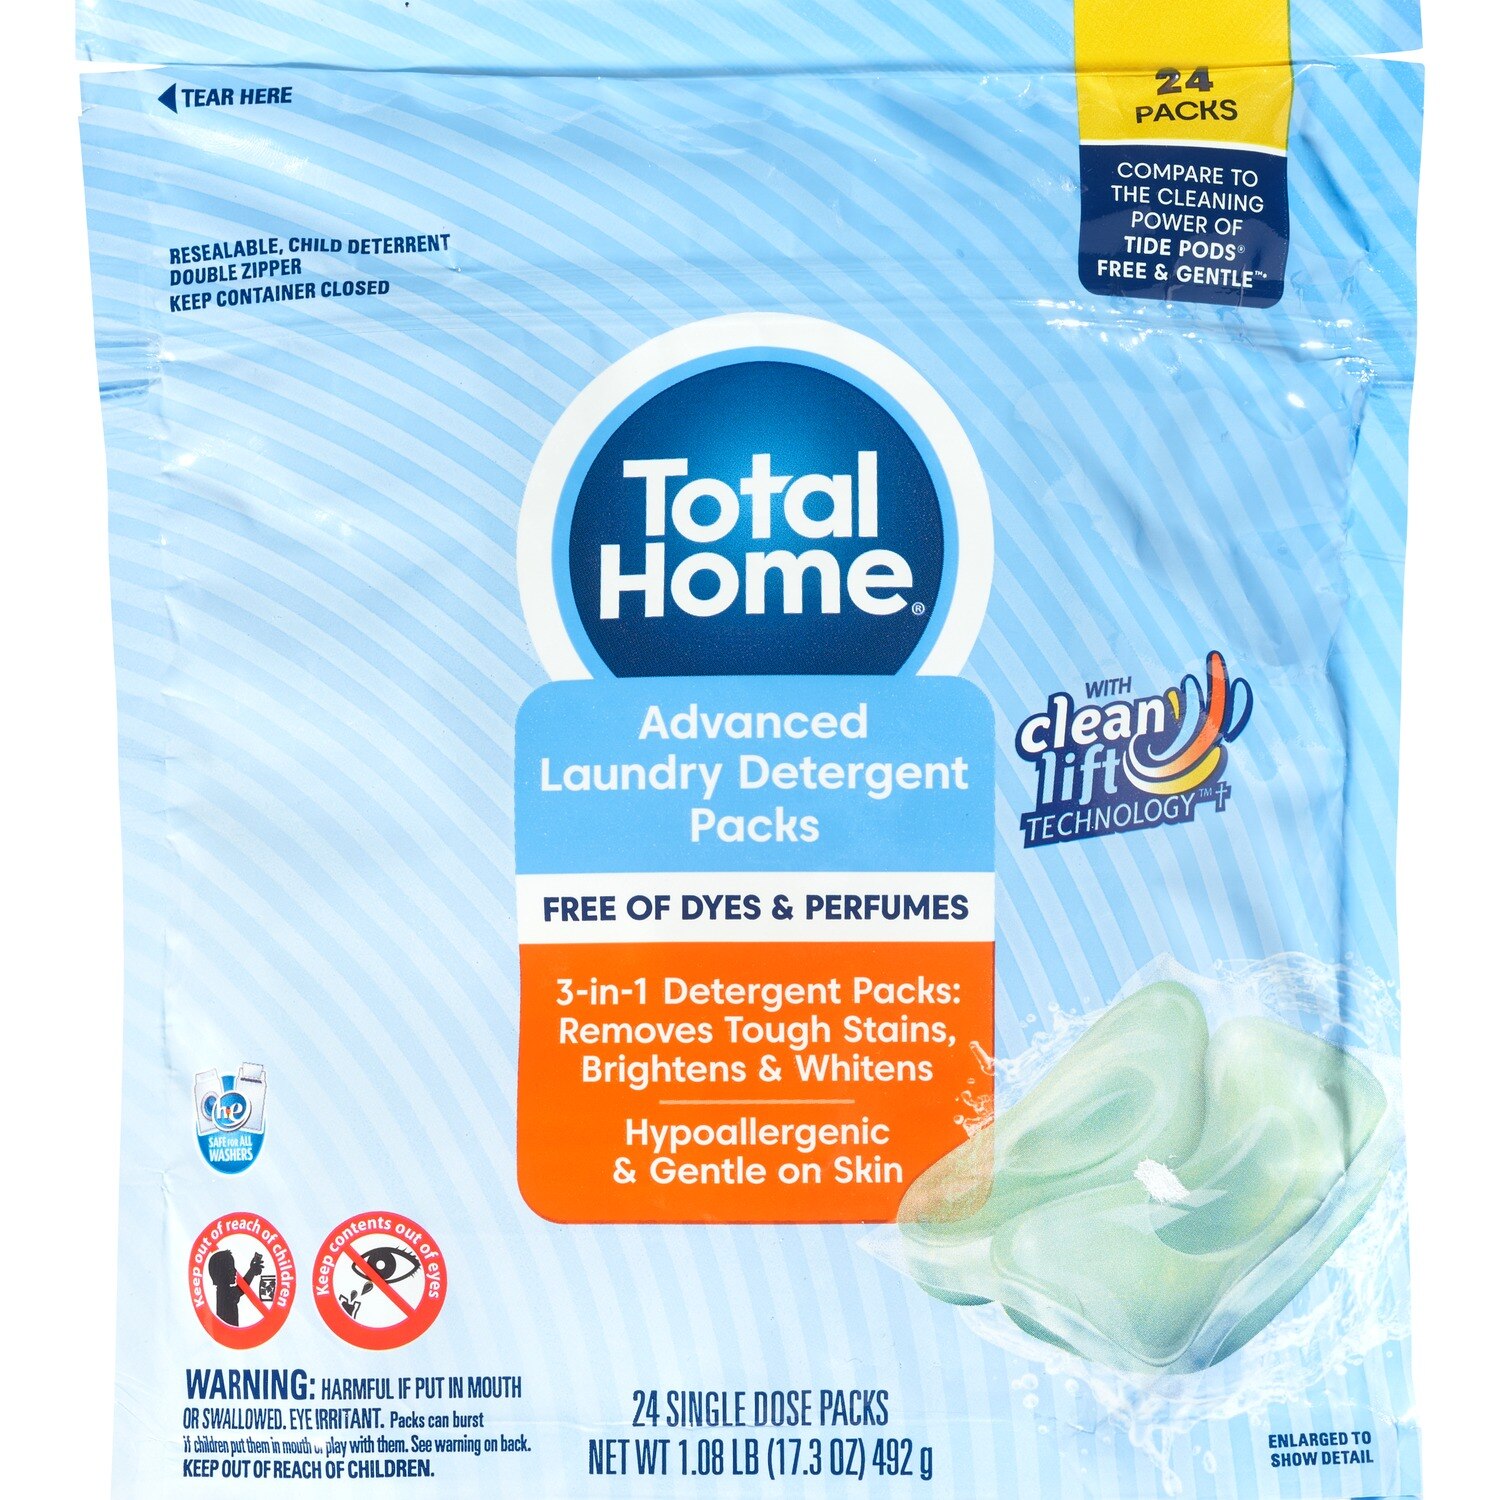 Total Home Advanced Laundry Detergent Packs, Free of Dyes and Perfumes, 24 CT